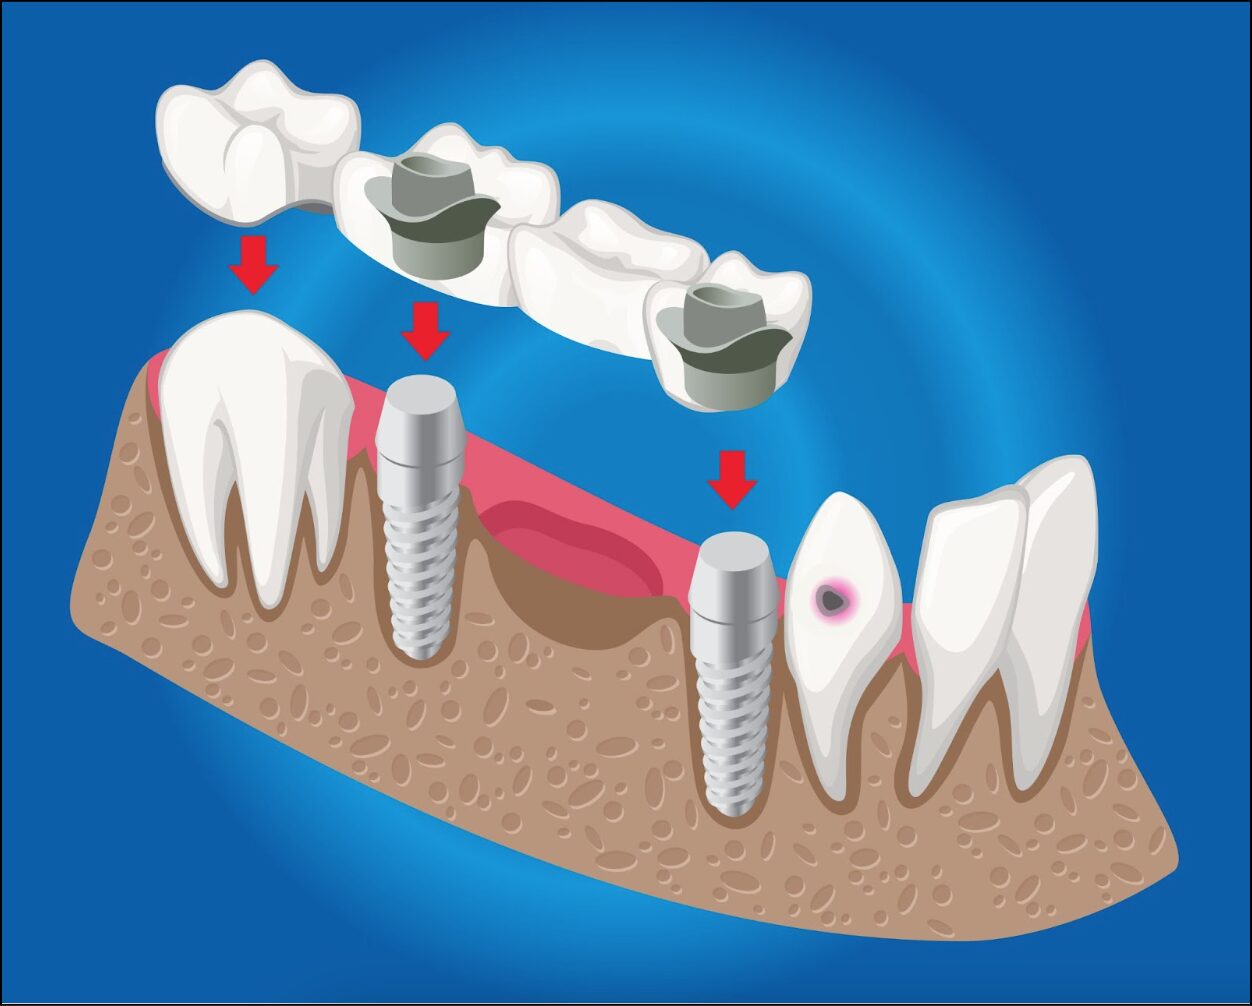 Overview of Dental Implants and Other Tooth Replacement Options